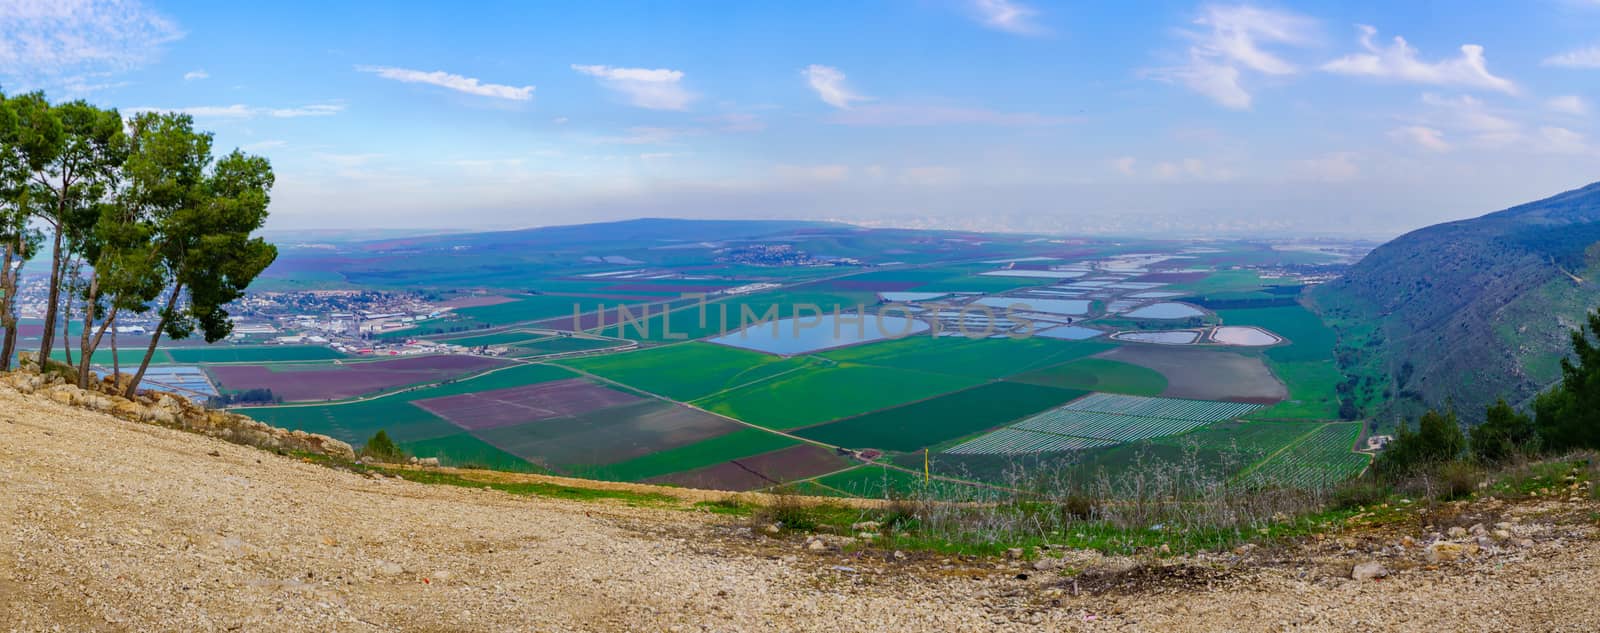 Panoramic view of landscape and countryside in the eastern part of the Jezreel Valley, Northern Israel